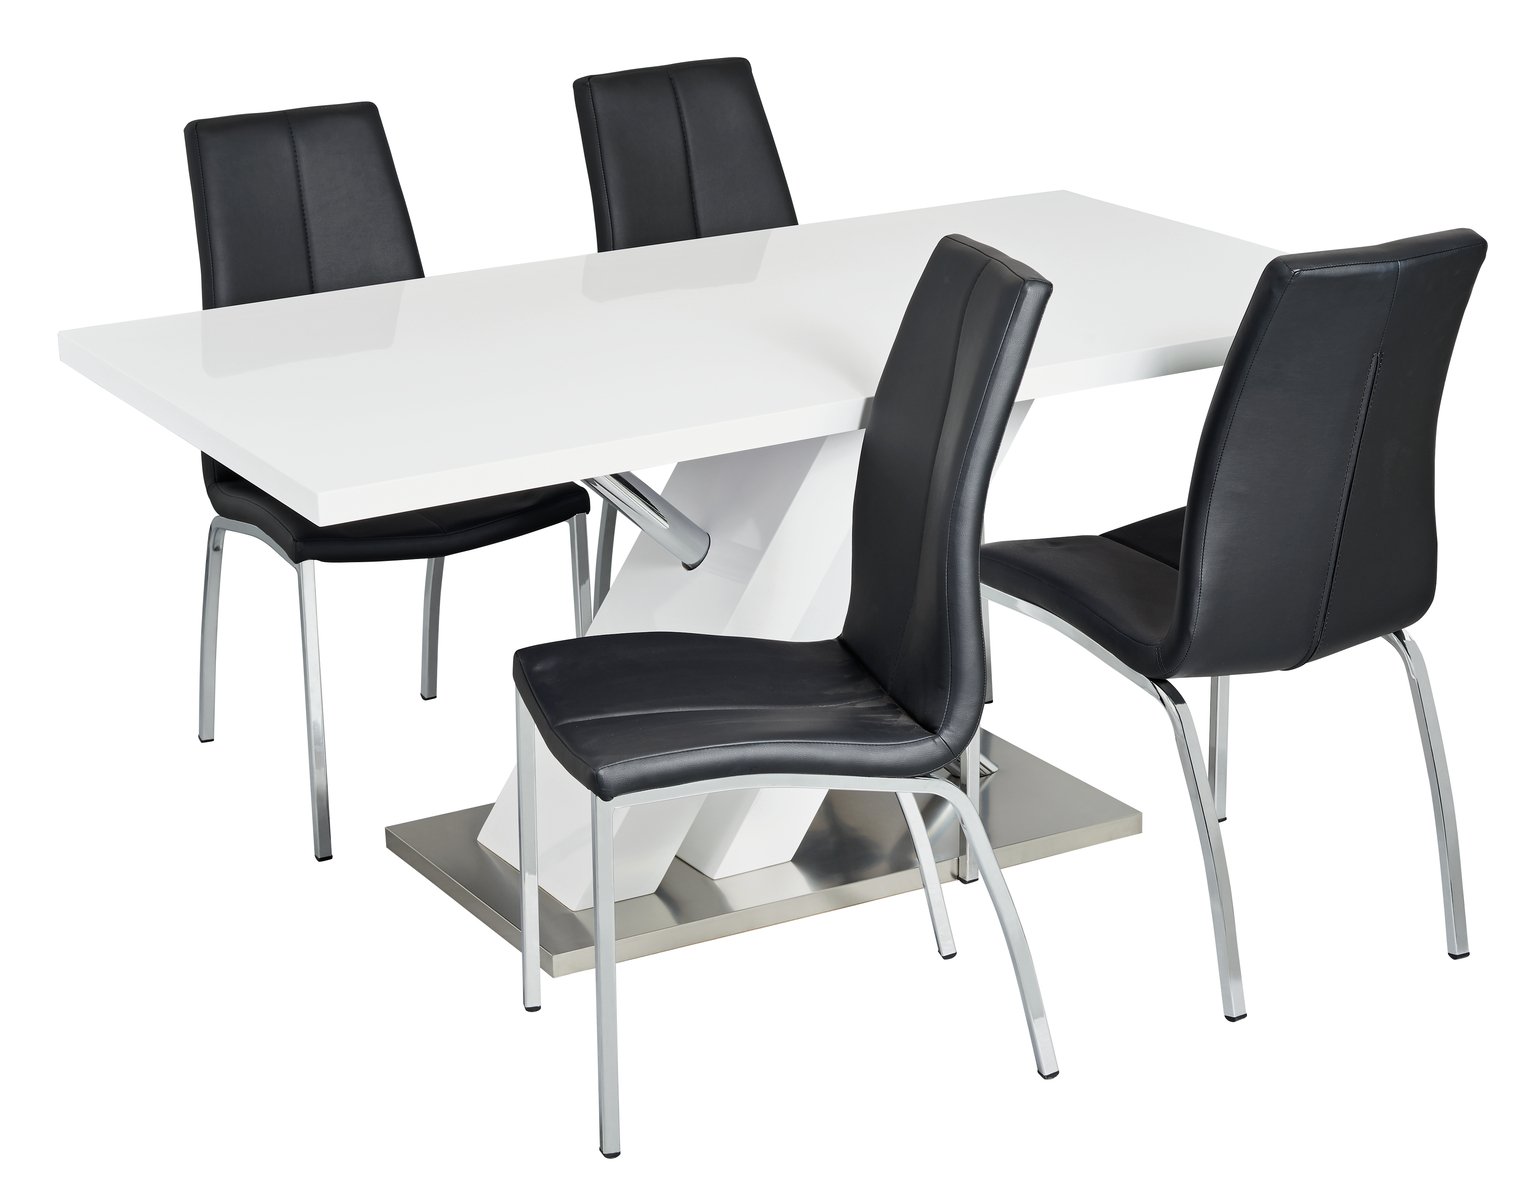 Argos Home Belvoir White Gloss Dining Table & 4 Black Chairs